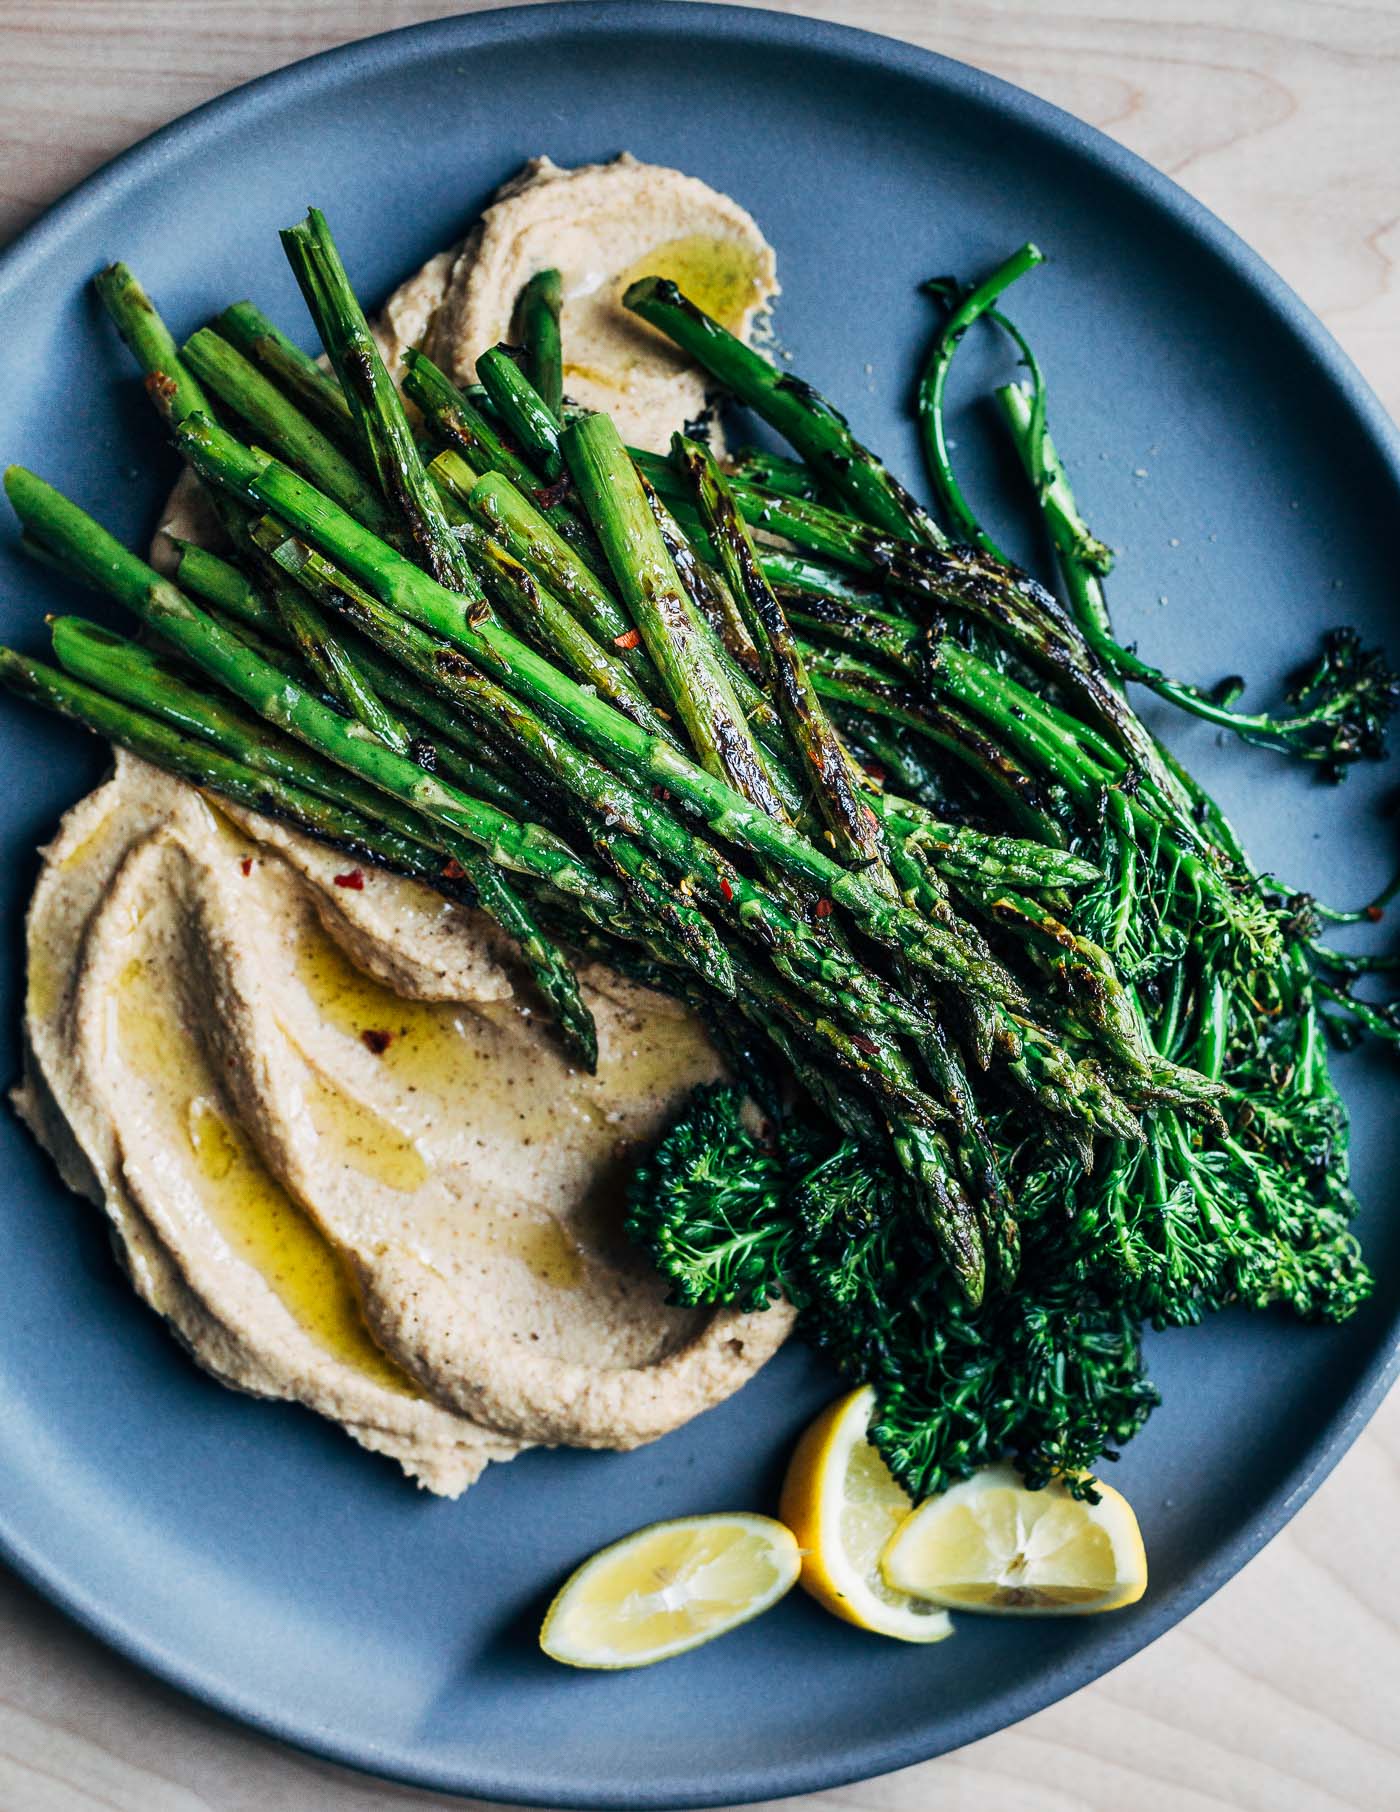 A big plate of vegetables with incredible depth of flavor, this roasted garlic and cauliflower puree topped with sautéed asparagus and broccolini perfectly captures the shifting spring season.